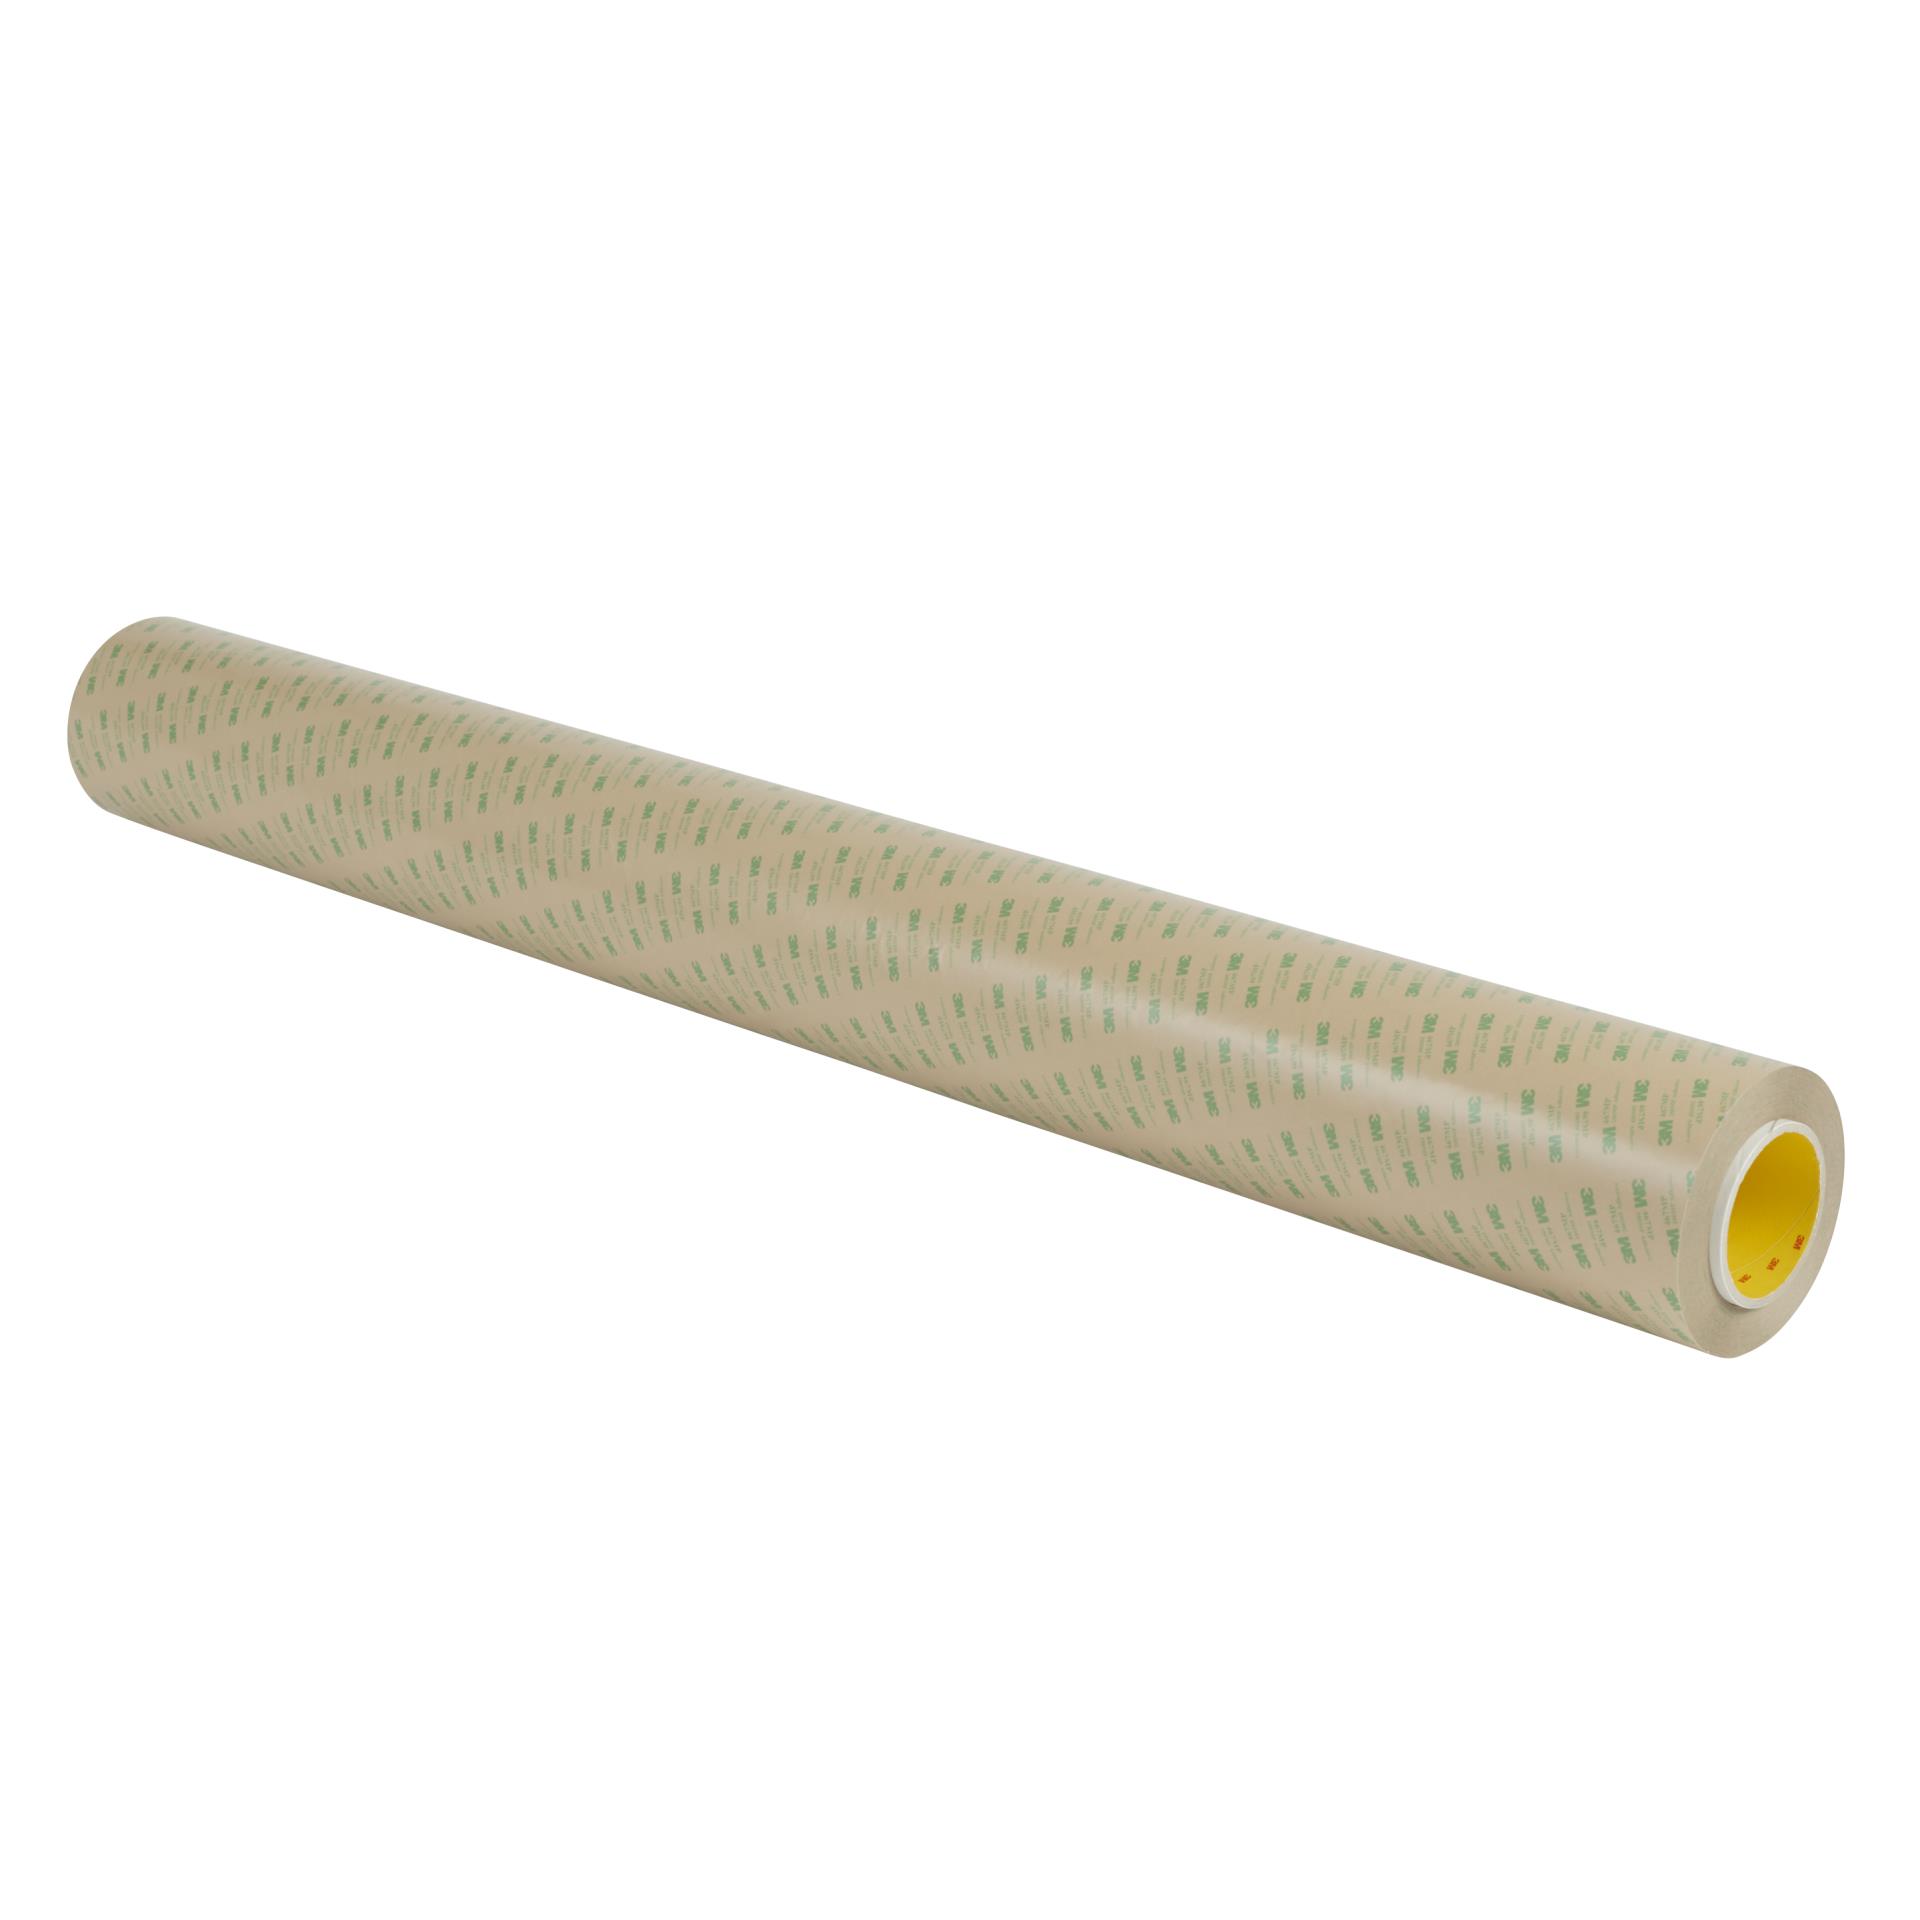 2-1/2 Inches x 30 Inches 7980 Scotch Mailing Tube